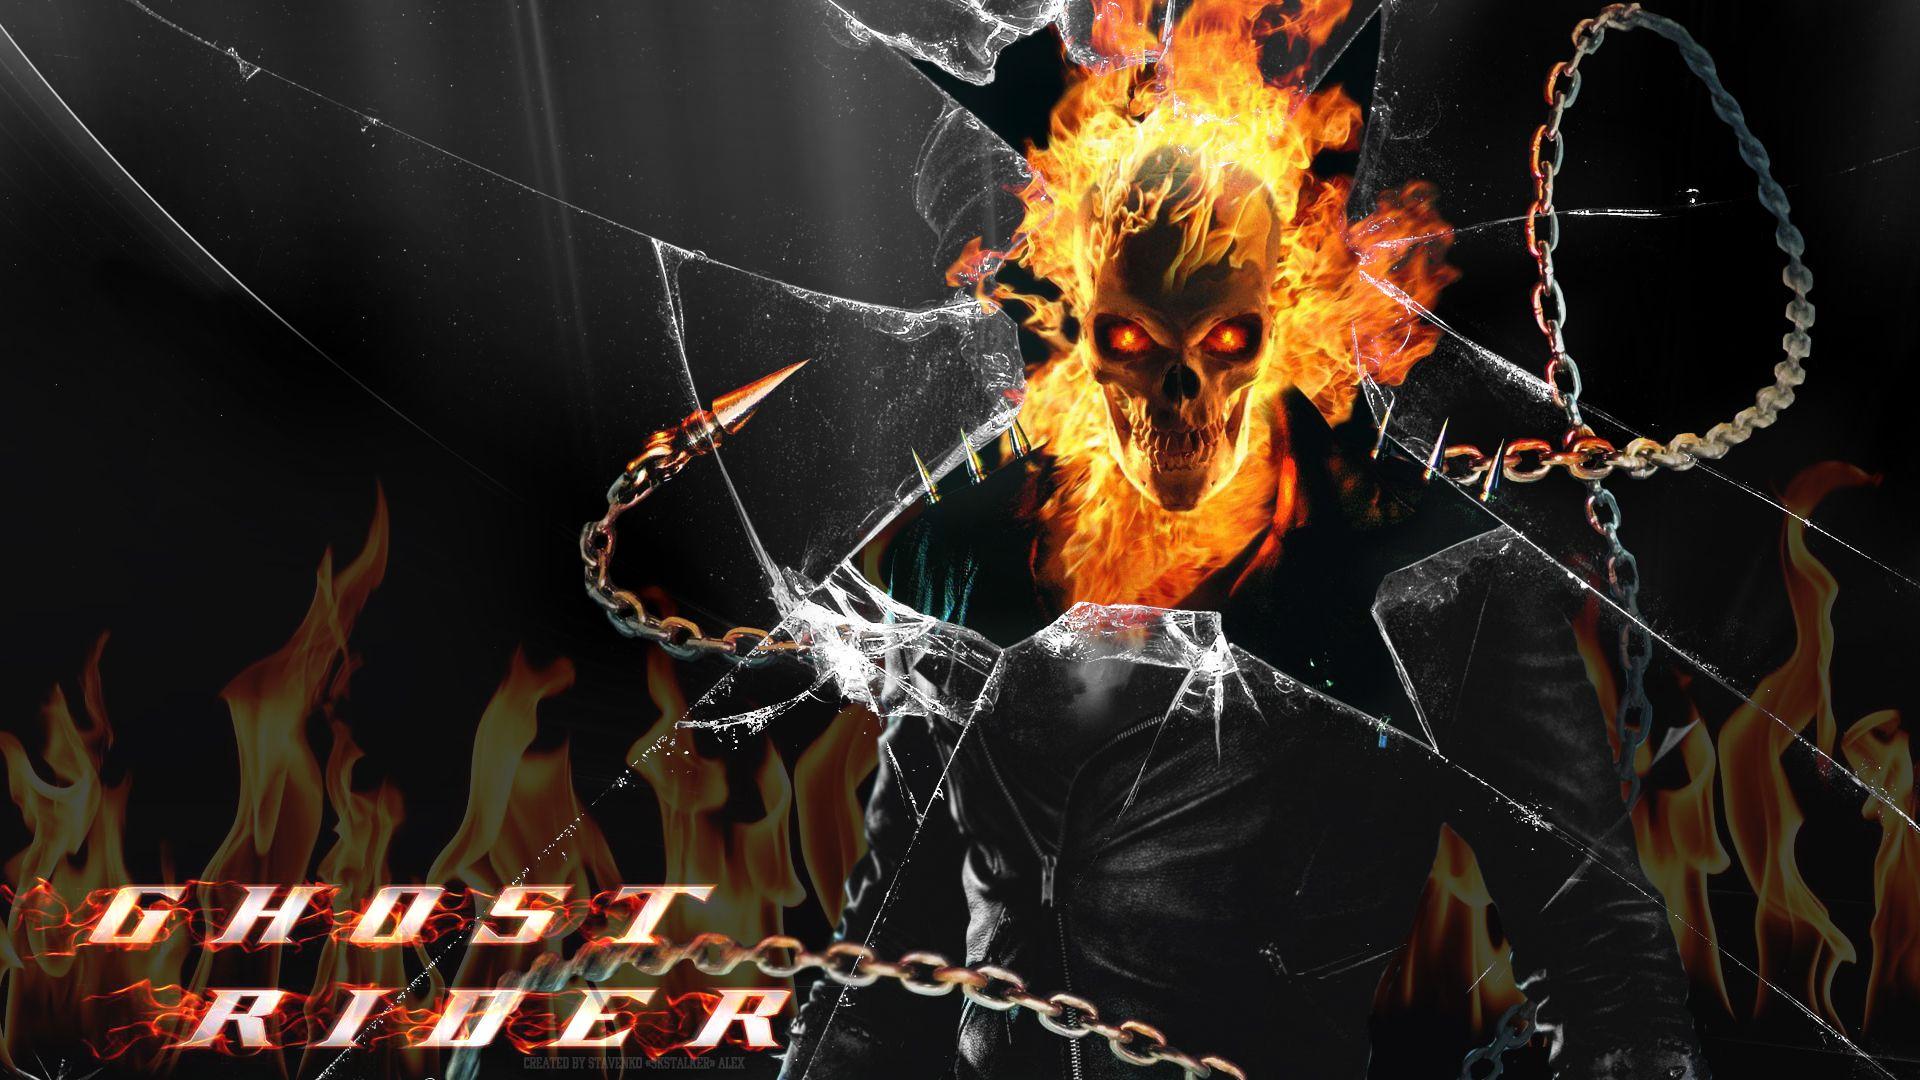 ghost rider wallpaper for windows 7